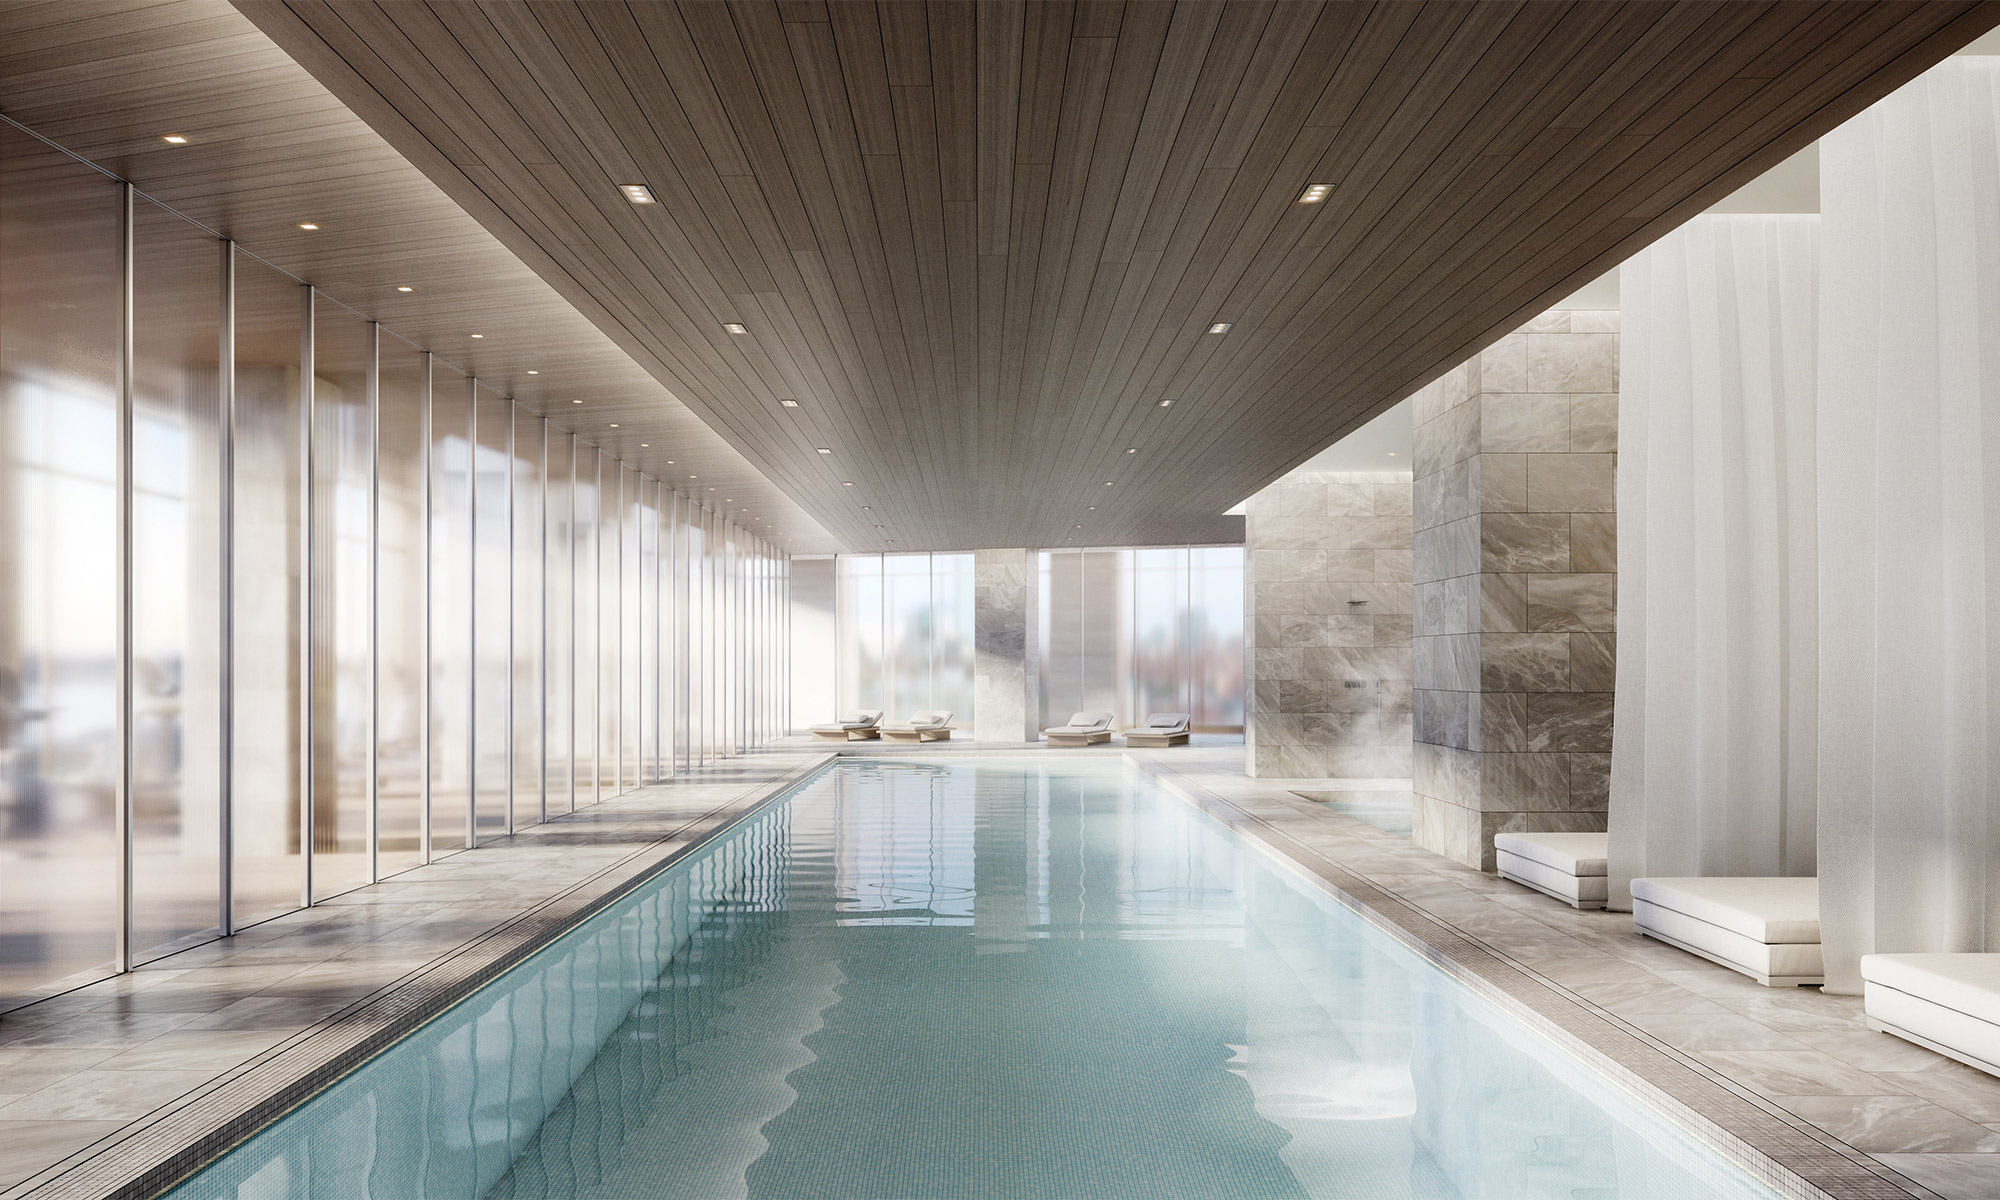 Long indoor pool with marble flooring and wood paneled ceiling